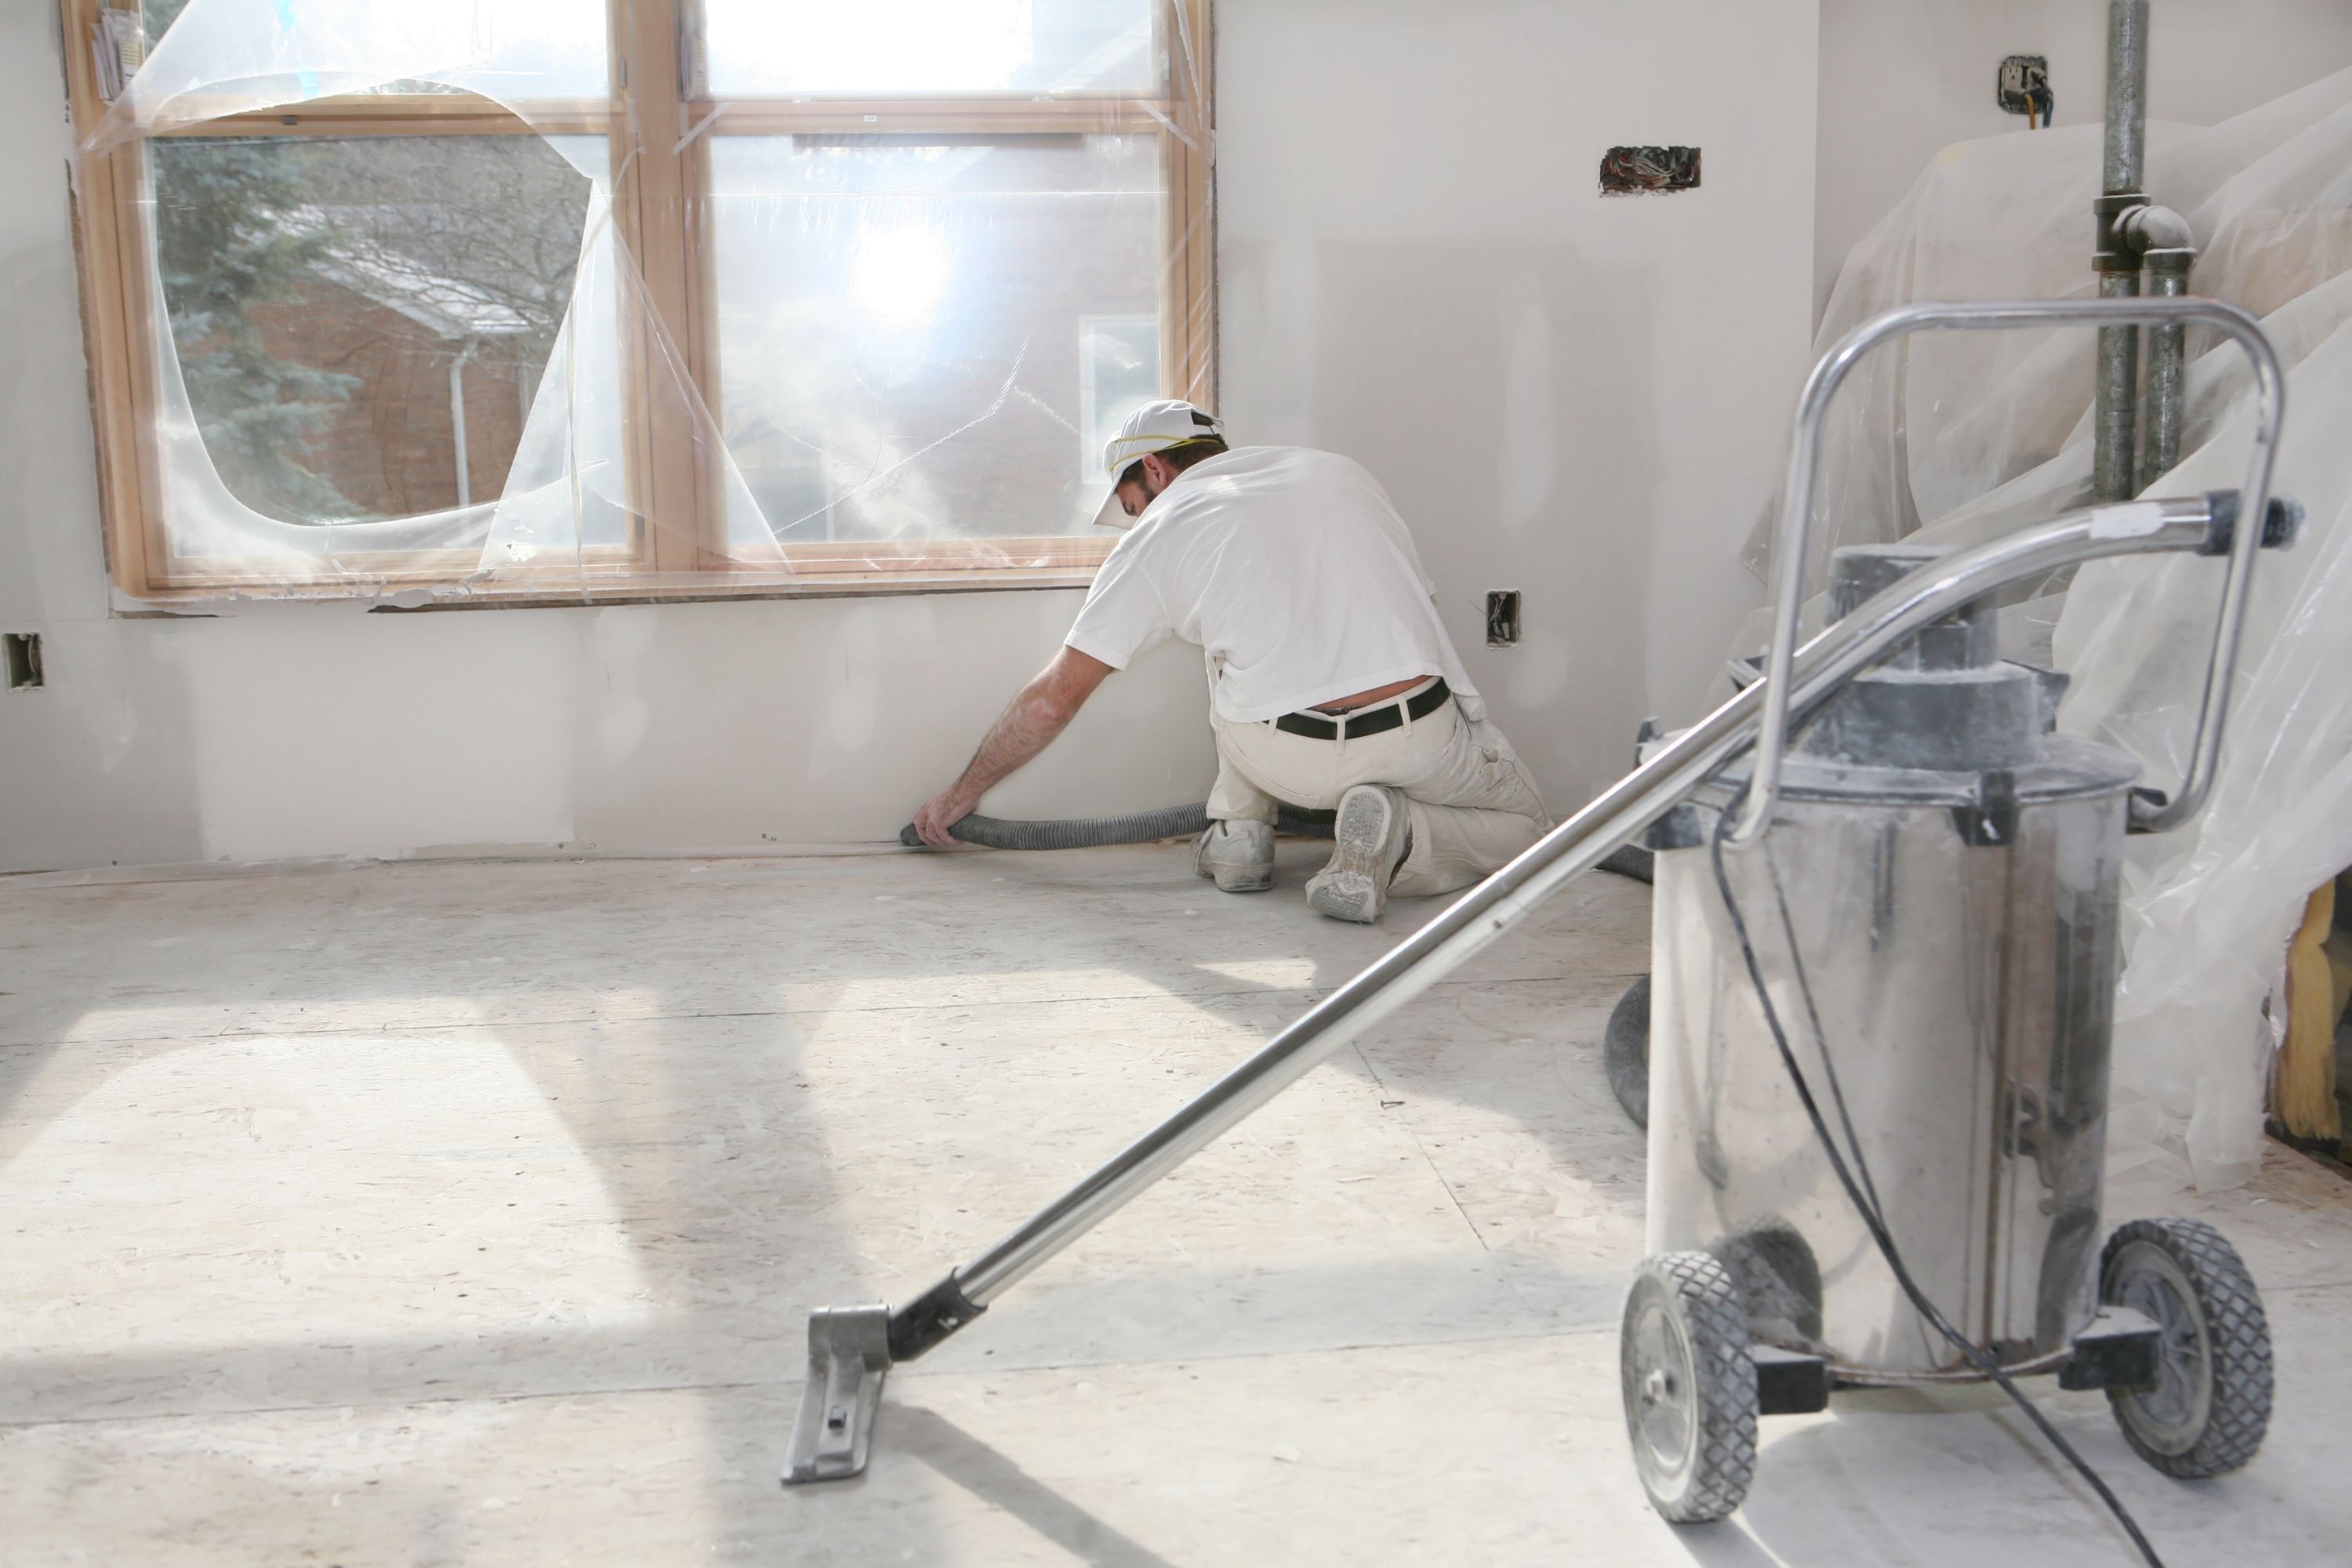 How to Clean Up Drywall Dust From Windows, Ceilings, Doors